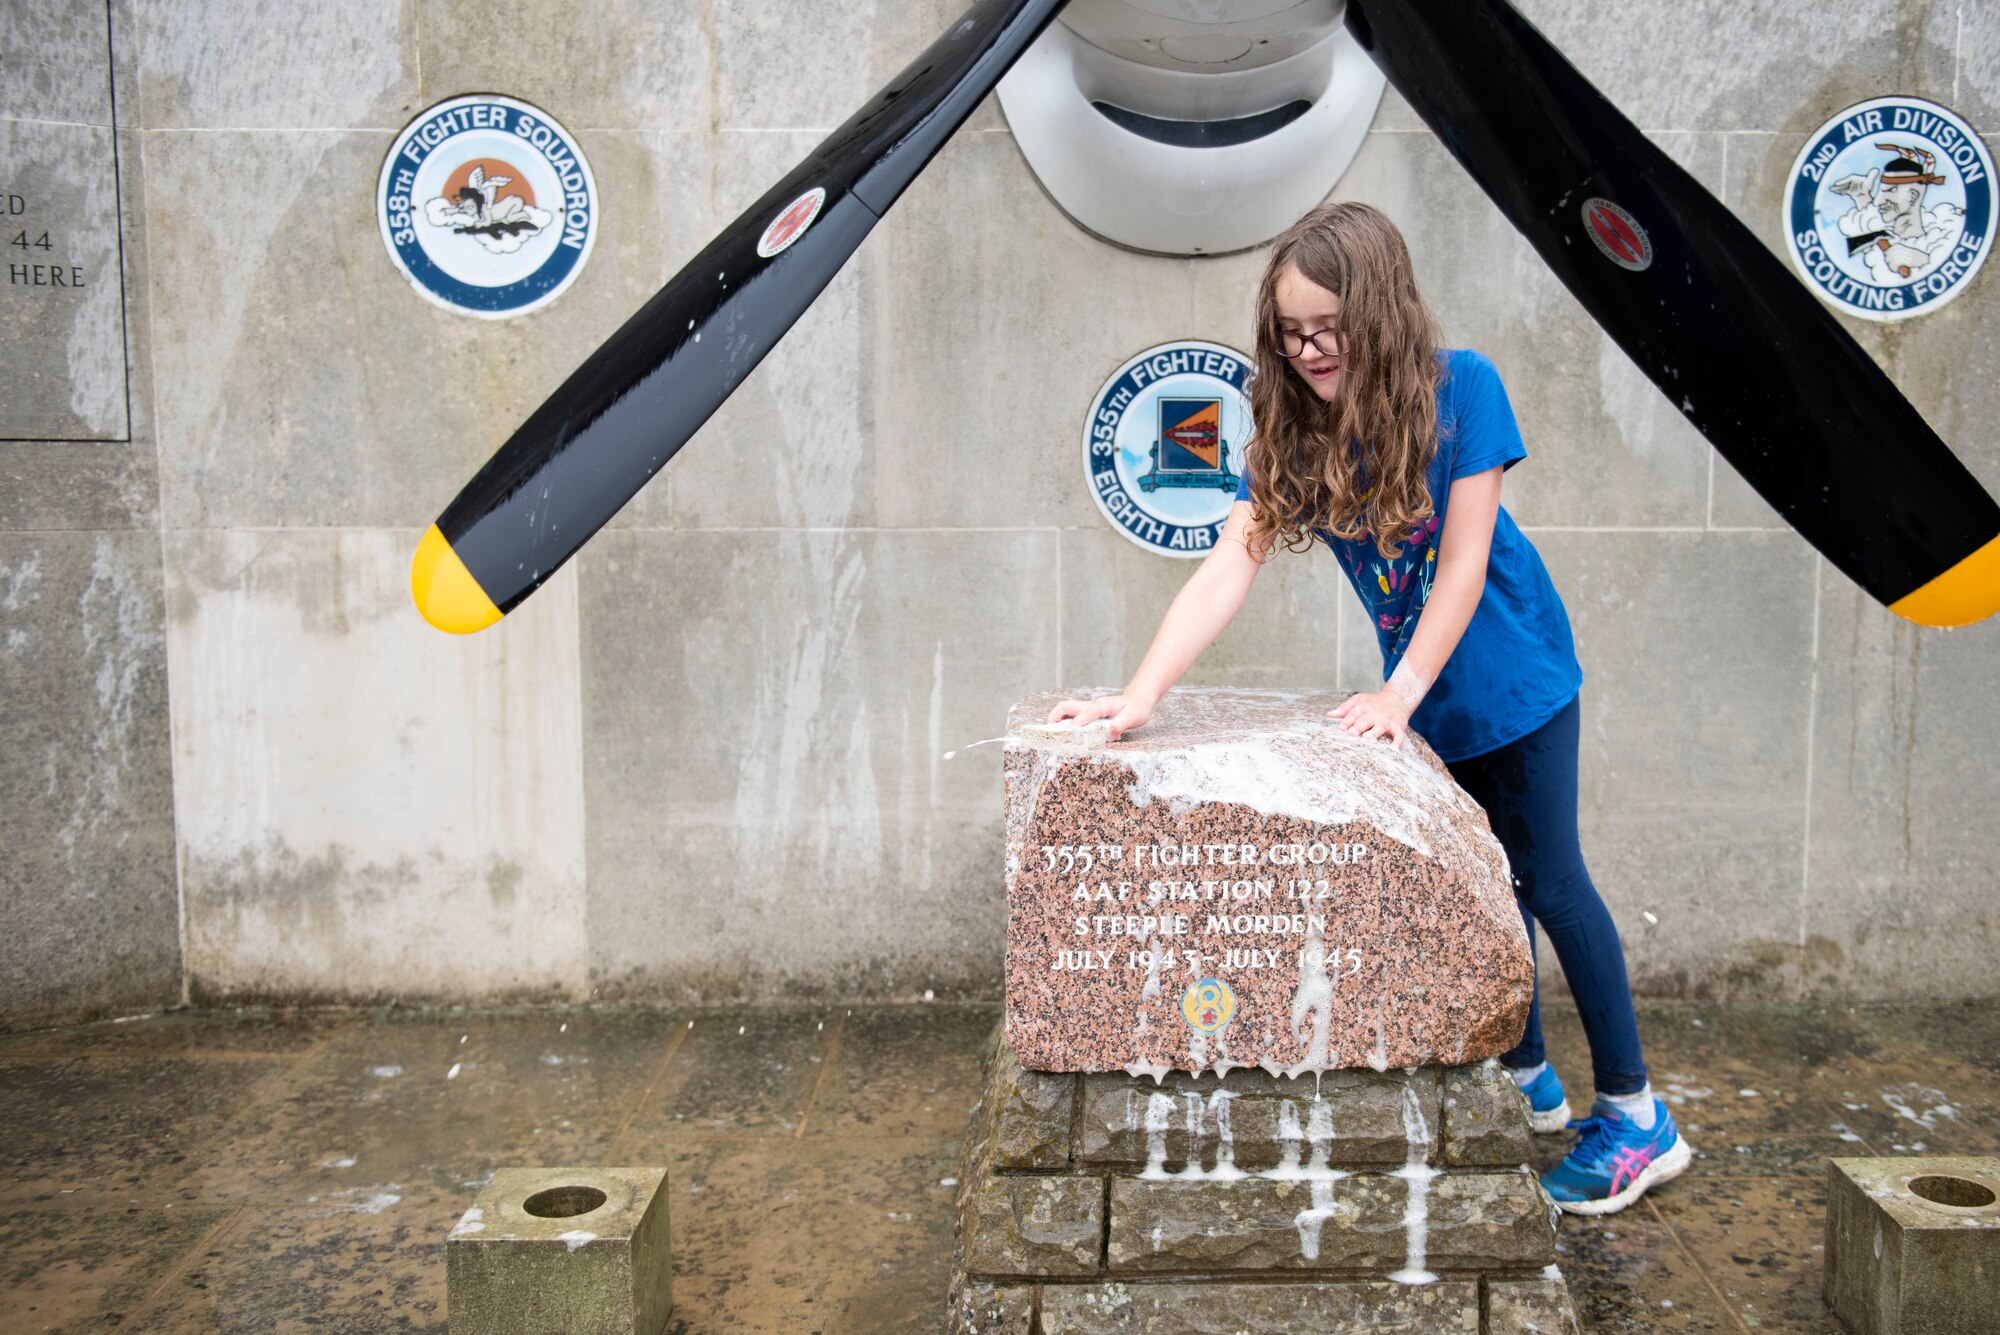 Jessa Dunmire scrubs the 355th Fighter Group Steeple Morden Memorial in Steeple Morden, England, during Operation TORCH-2020 memorial cleanup August 15, 2020. U.S. Africa Command Directorate for Intelligence at RAF Molesworth partnered with the American Battle Monuments Commission to host Operation TORCH-2020, where over 50 military members and their families, U.K. nationals and Boy Scout Troop #245, cleaned six WWII memorial sites to preserve American service member legacies and promote an appreciation of past American heroes among present-day USAFRICOM workforce and families. (U.S. Air Force Photo by Airman 1st Class Jennifer Zima)